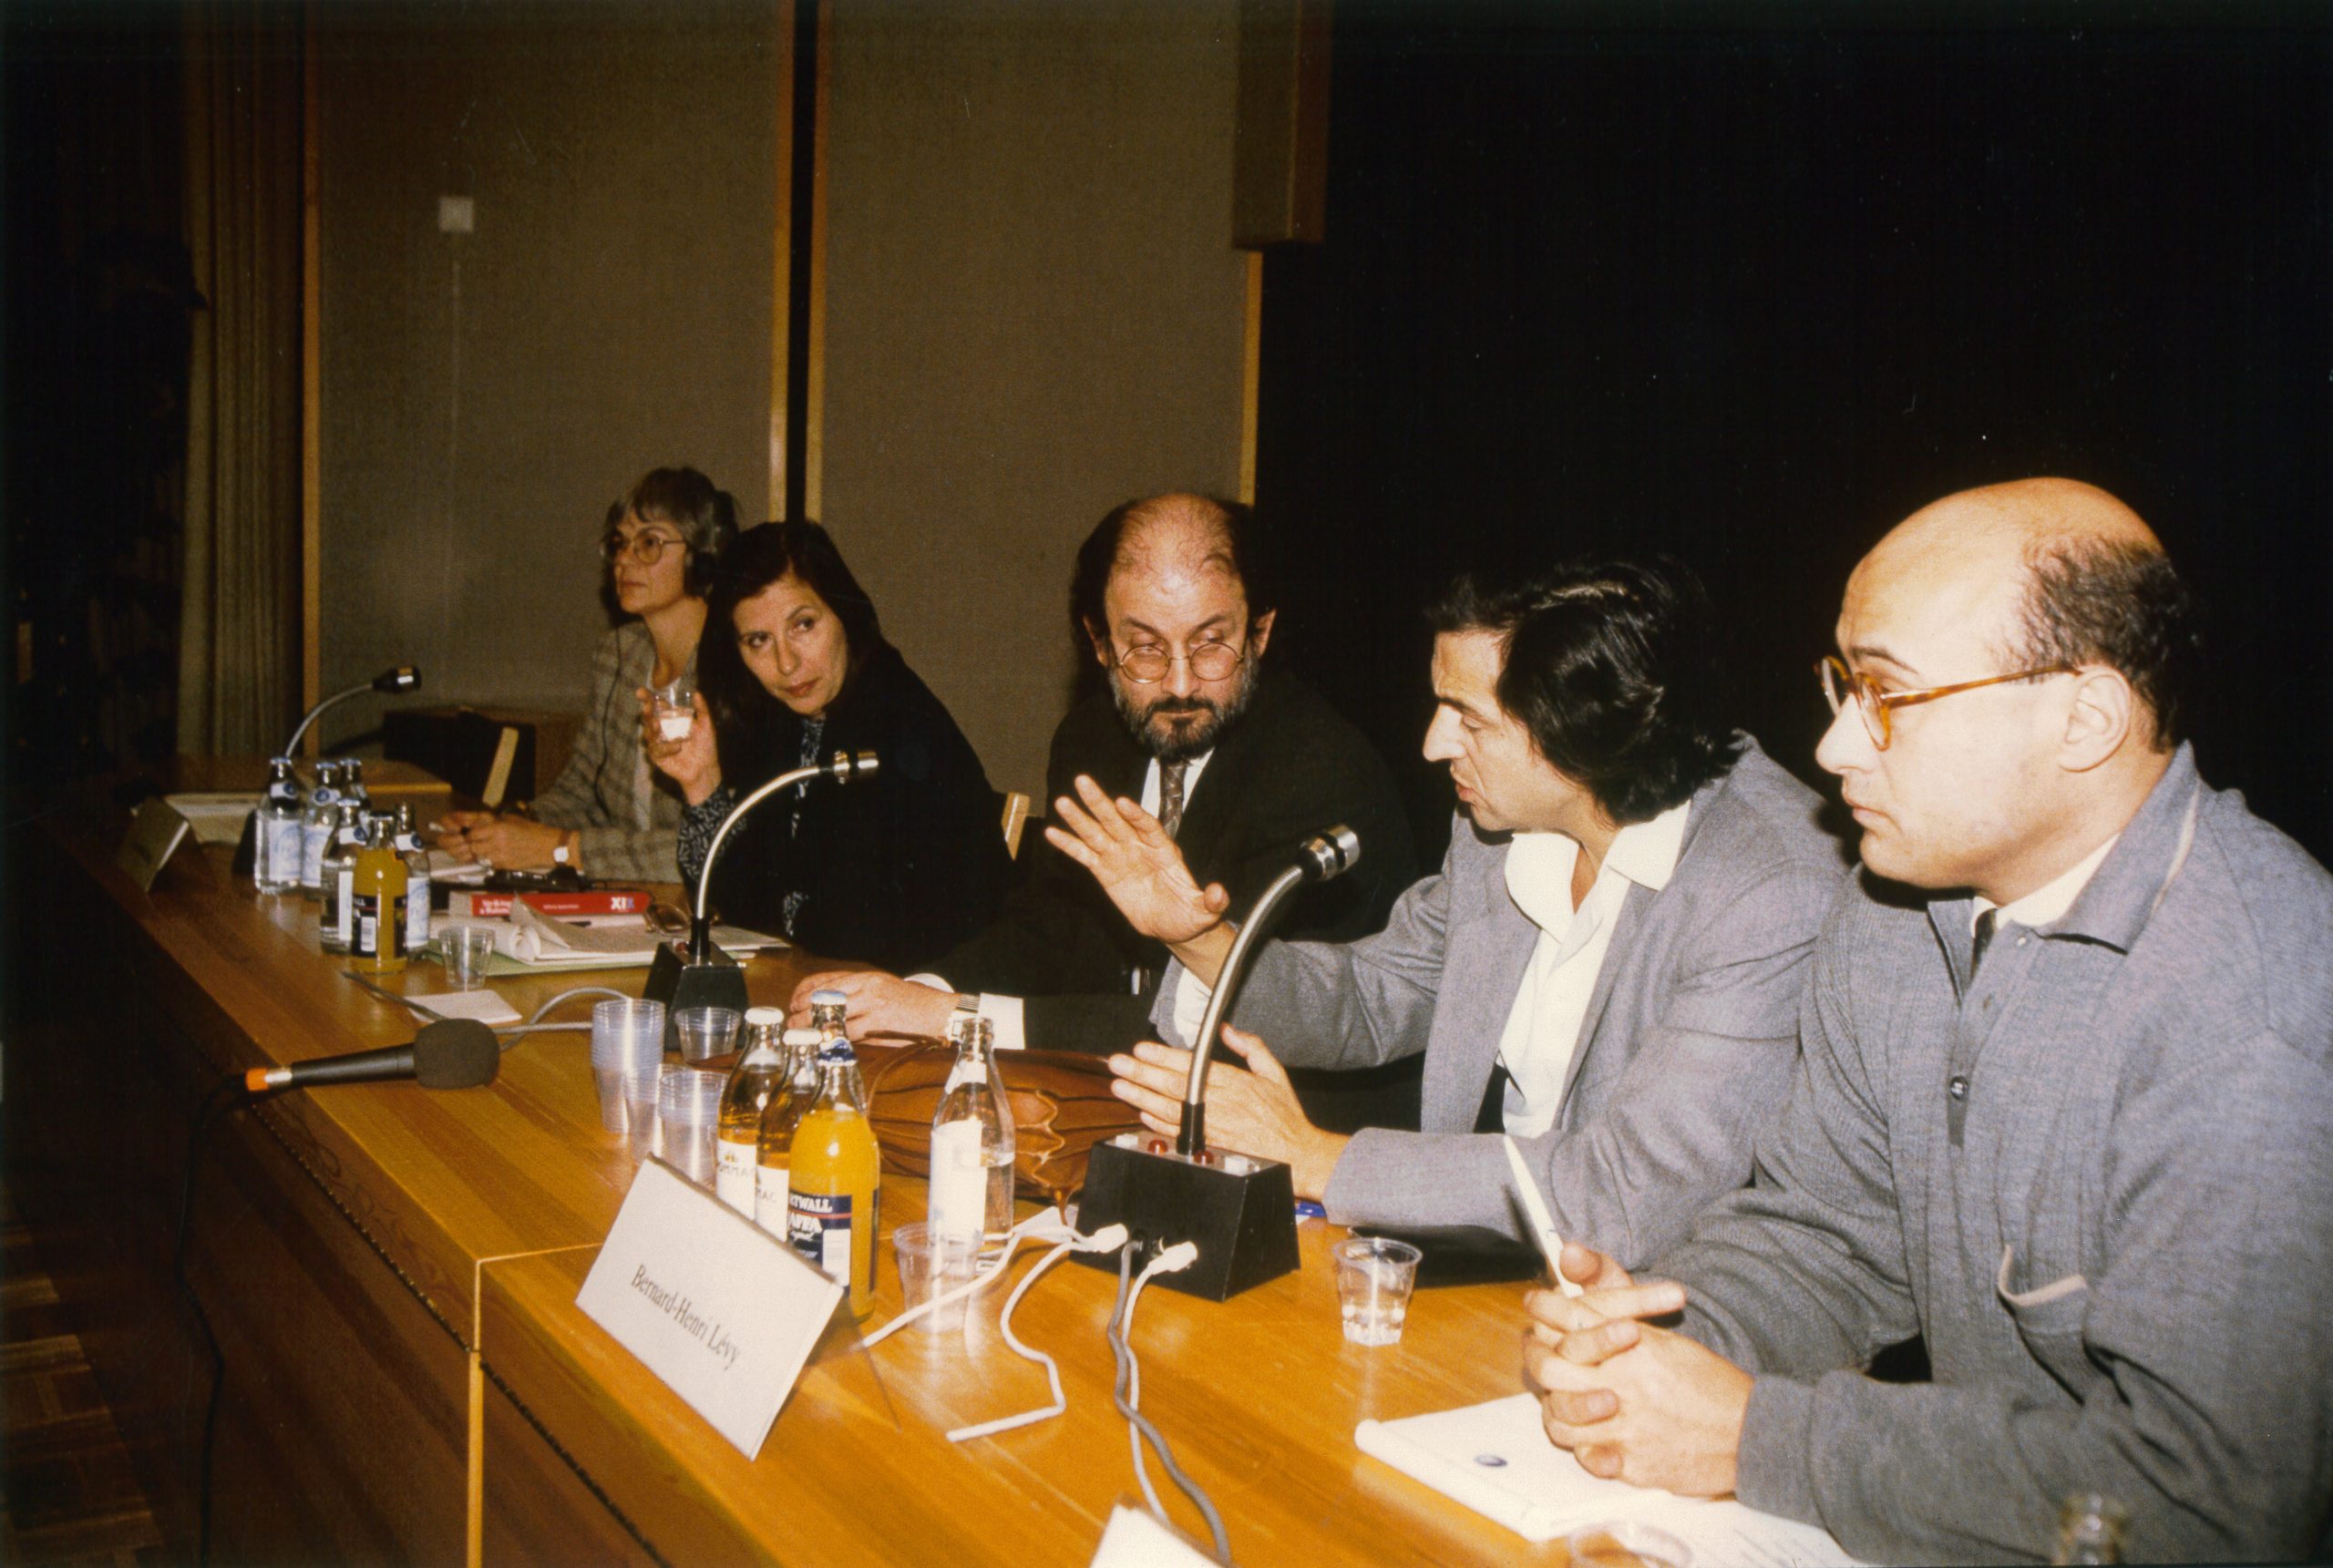 First meeting between Bernard-Henri Lévy and Salman Rushdie in Helsinki in October 1992, during a conference.